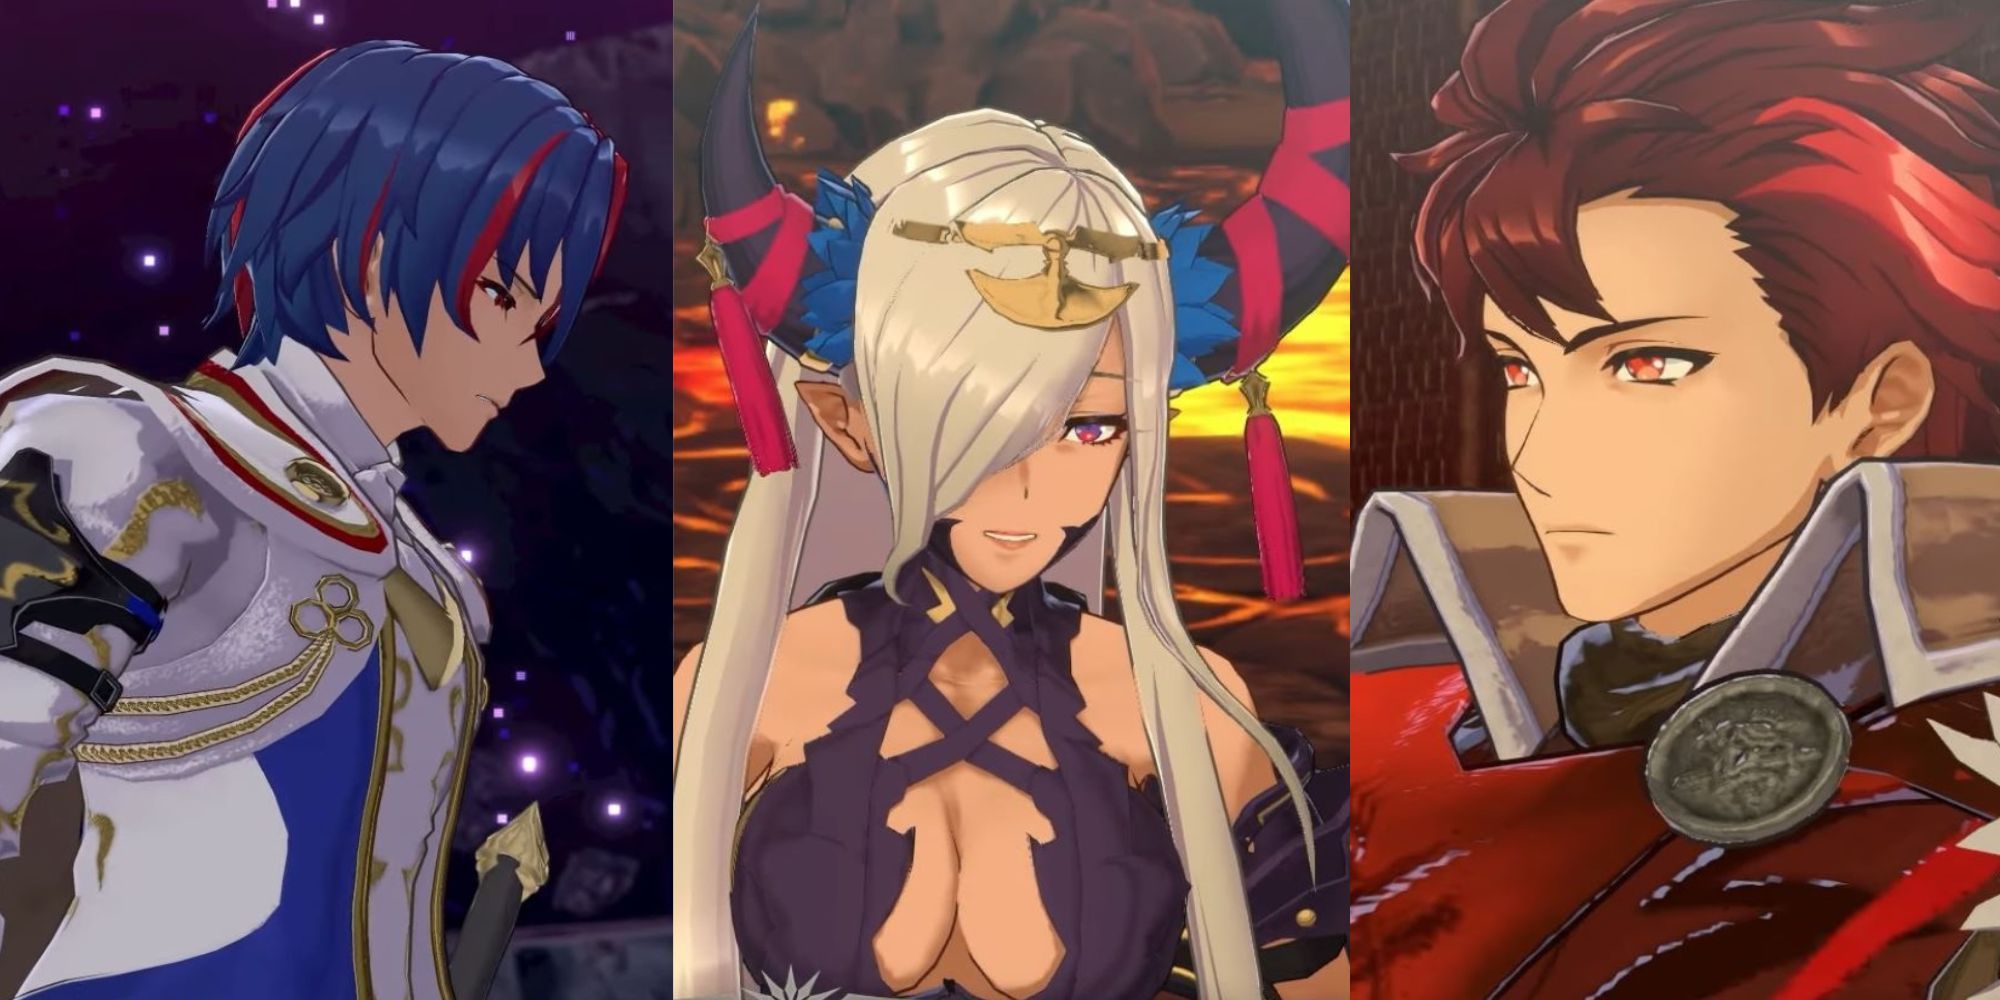 Fire Emblem Engage: Most Memorable Quotes Featuring Alear, Zephia, and Diamant